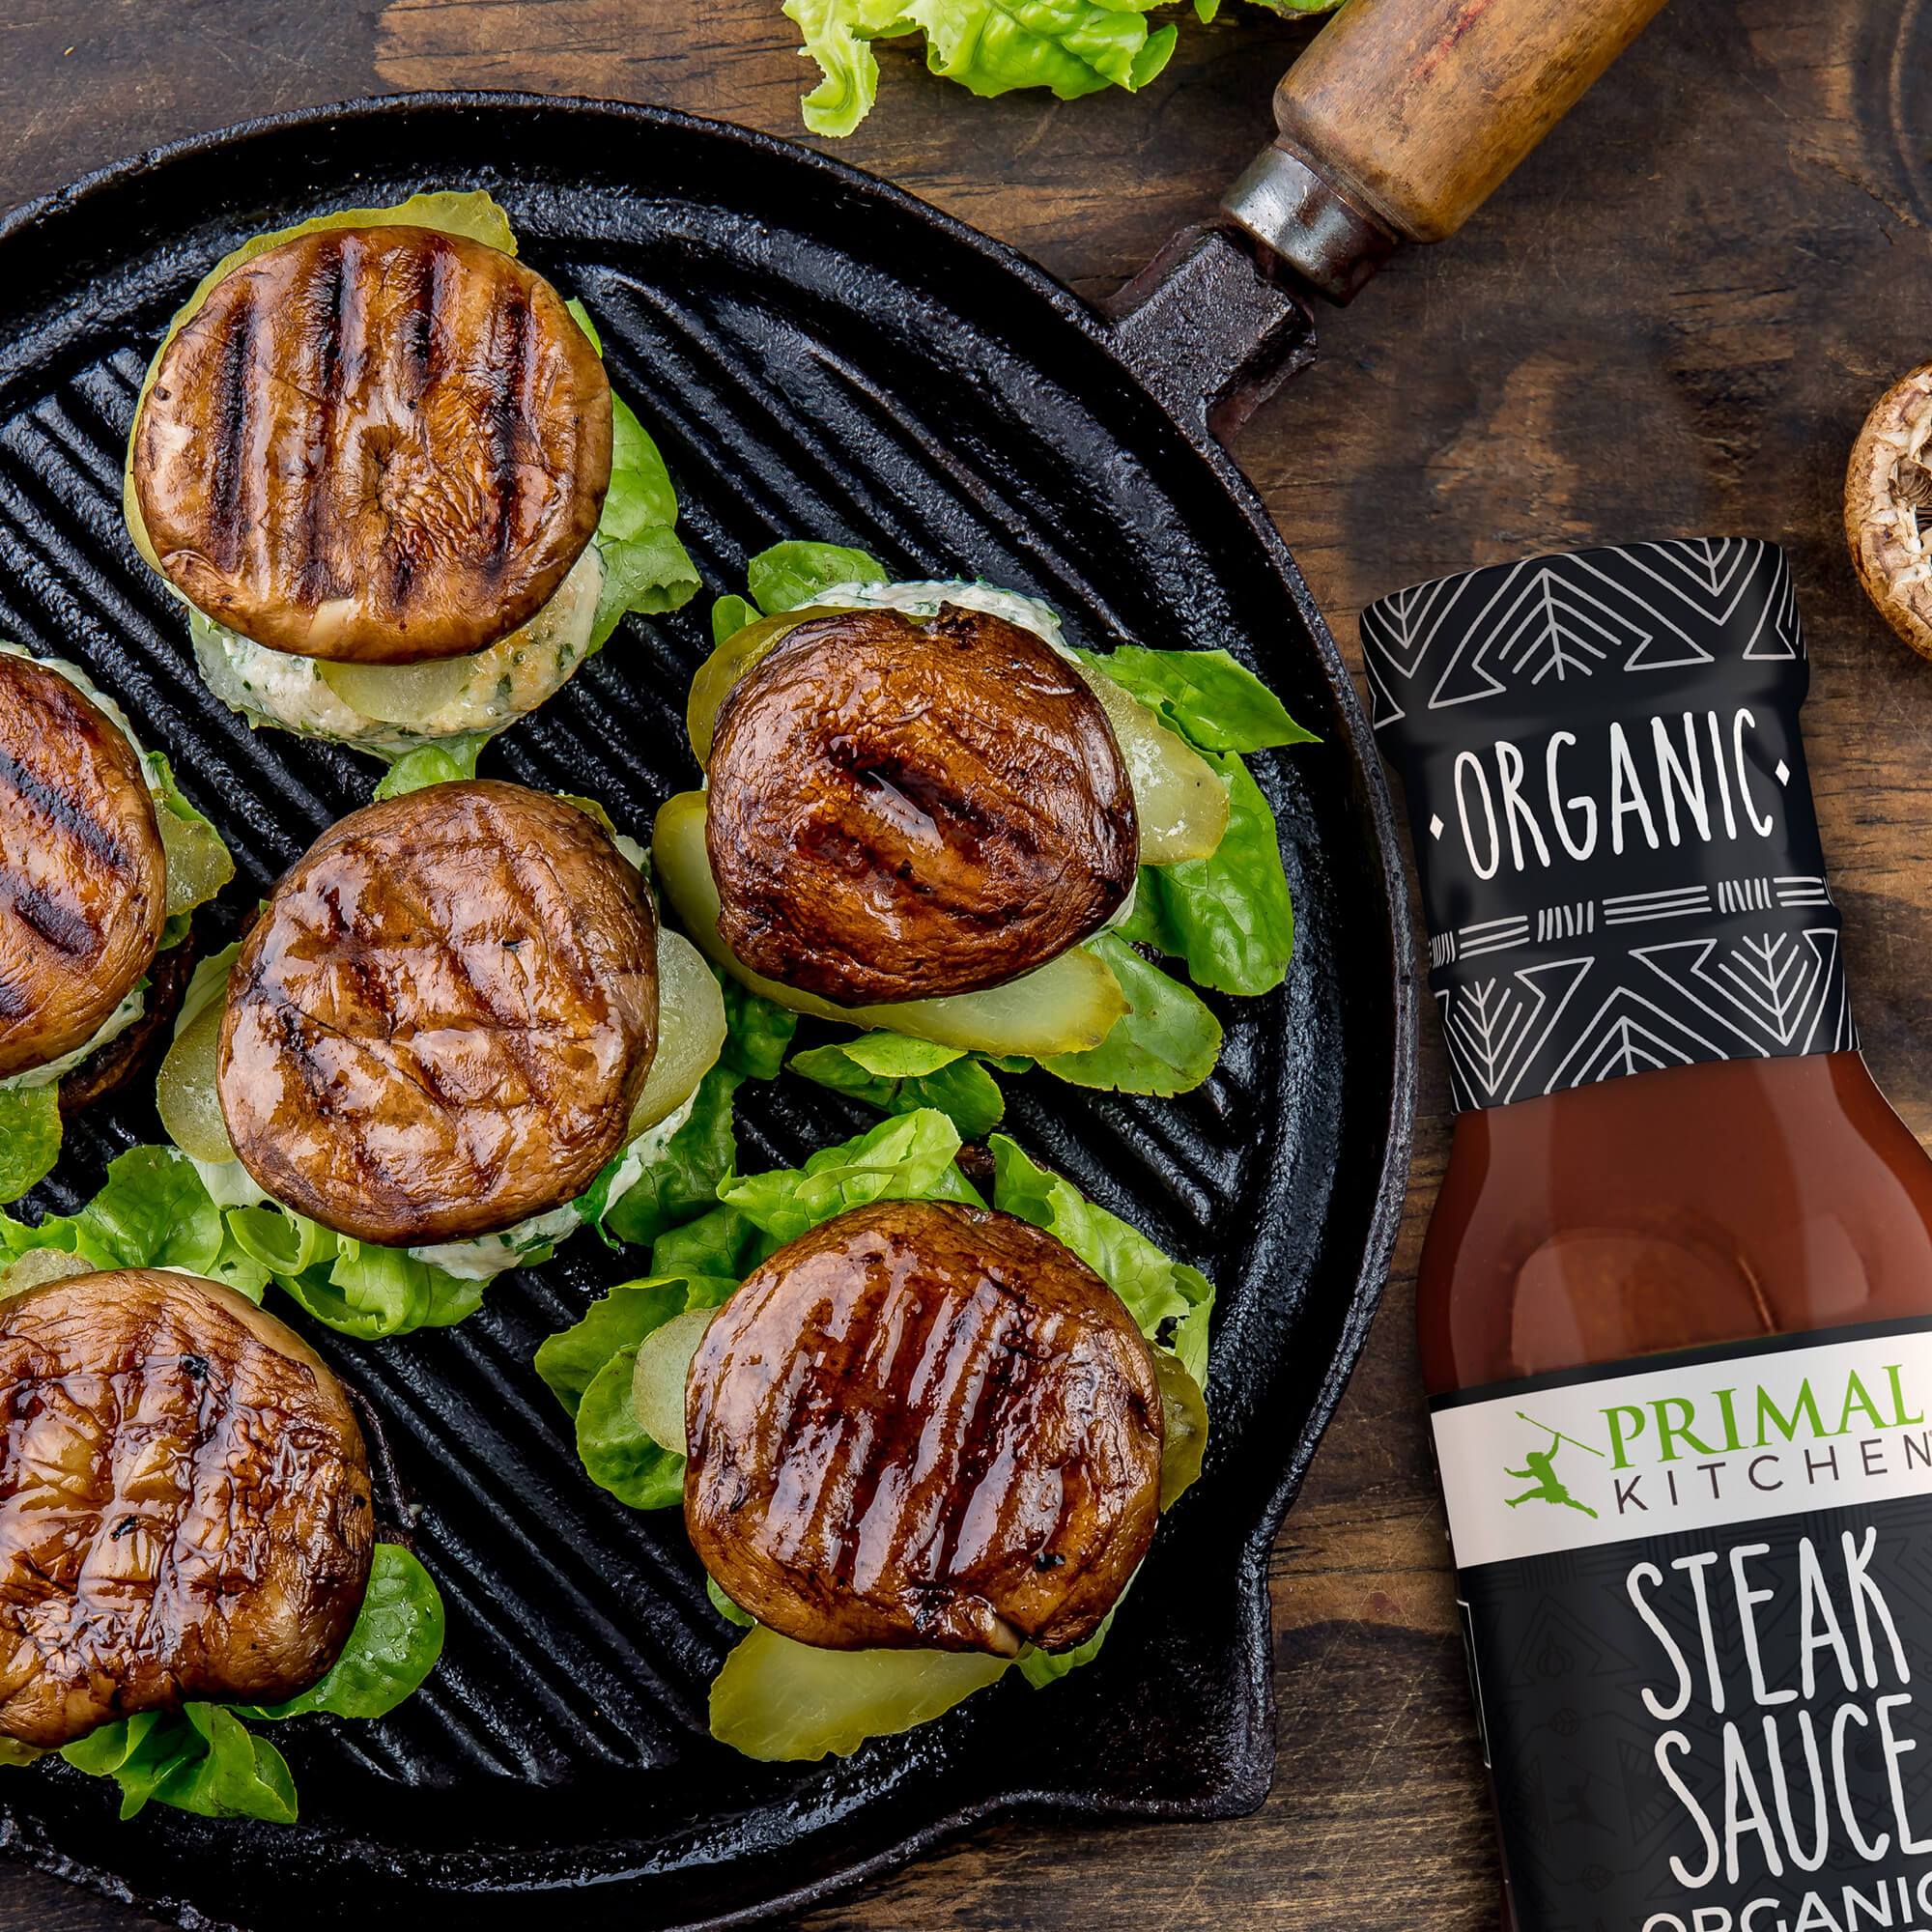 Grilled Portabella Mushroom burgers with organic lettuce and pickles on a skillet, alongside Primal Kitchen Organic Steak Sauce on a wood background